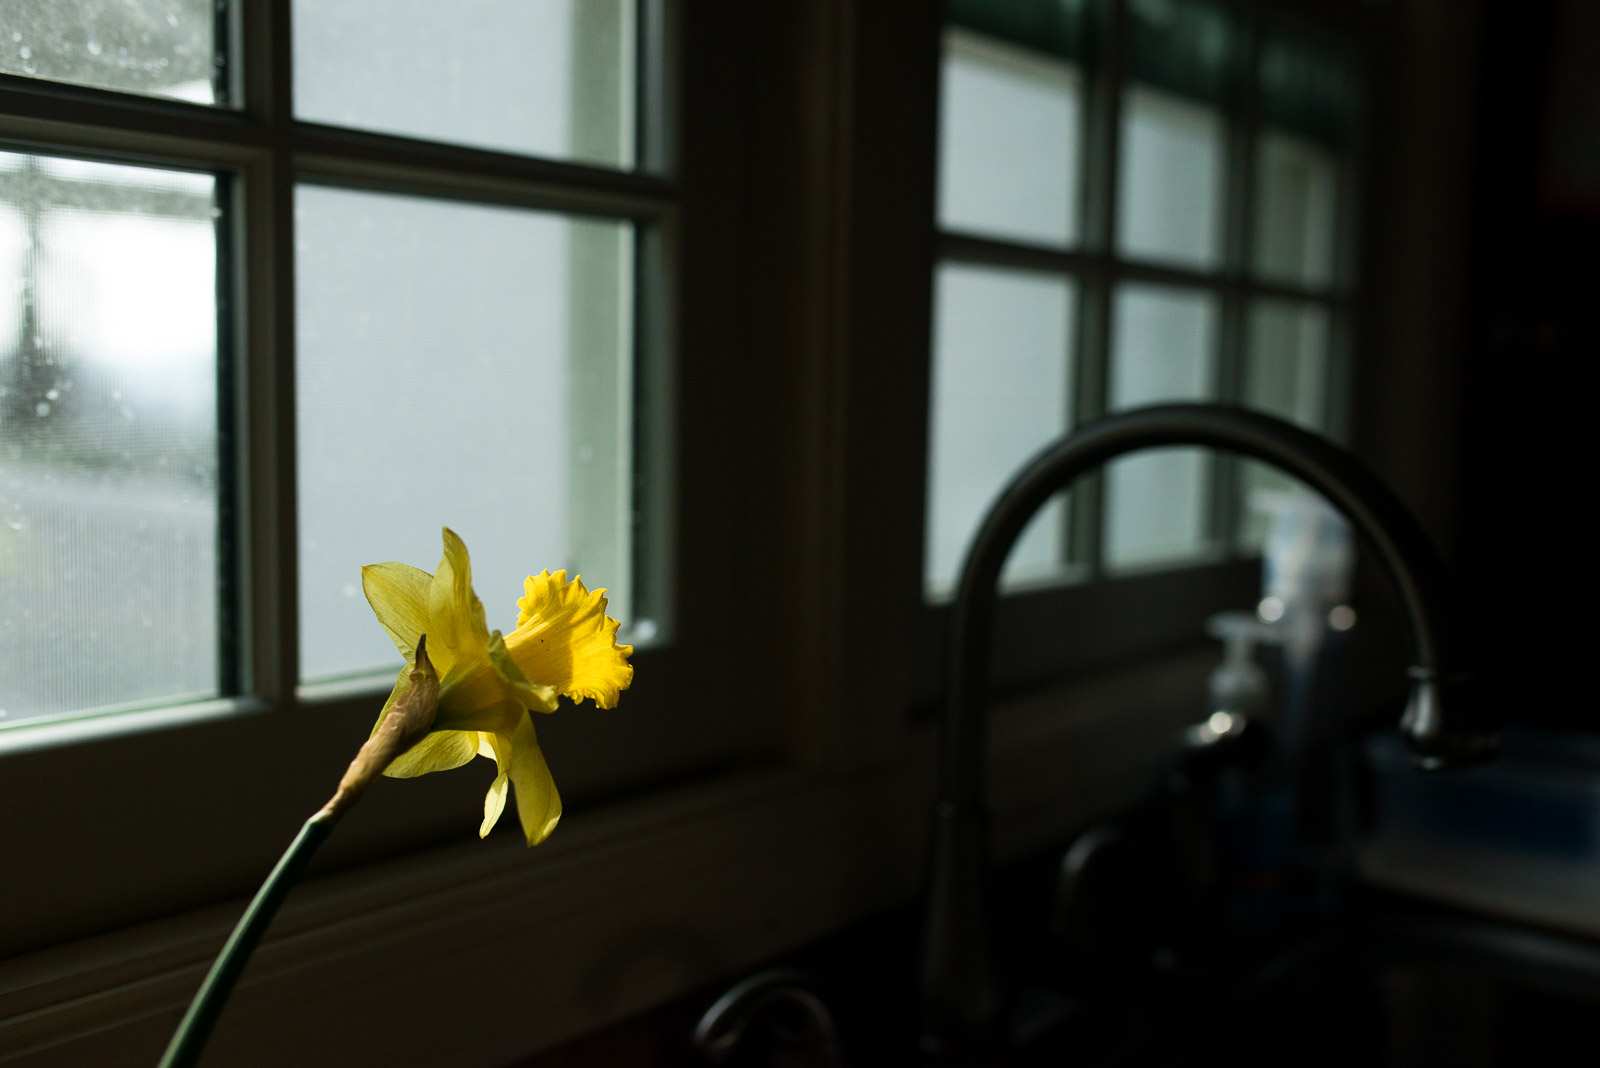 A storytelling still life image is a naturally occurring scene or object that tells a story and contains no people. I enjoy photographing storytelling still life photos all over my home, but my favorite spot is the kitchen window above the sink.